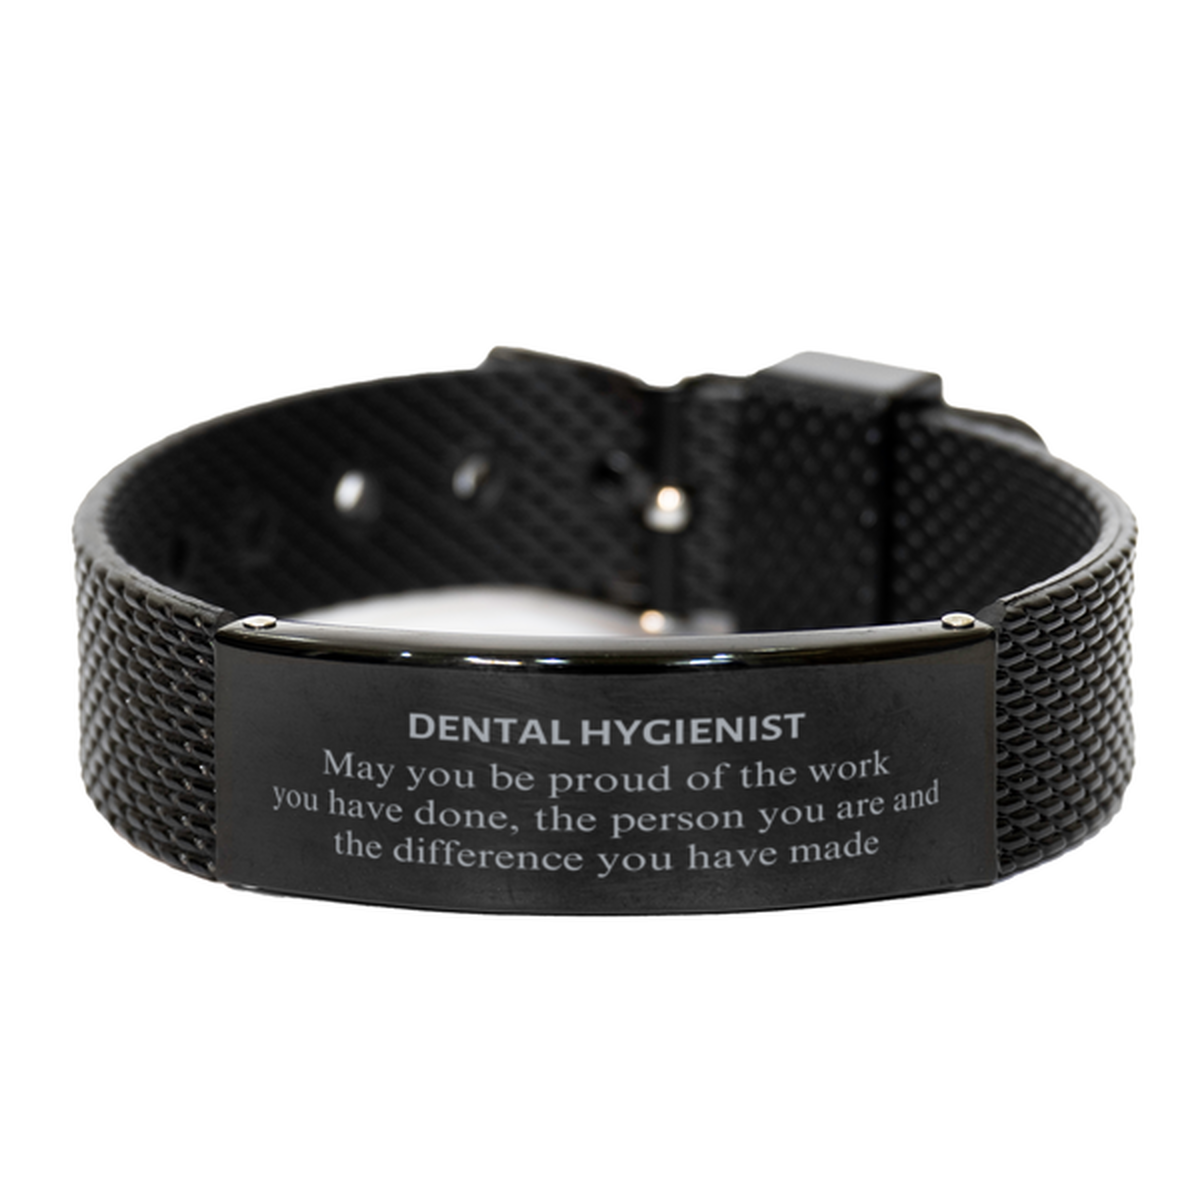 Dental Hygienist May you be proud of the work you have done, Retirement Dental Hygienist Black Shark Mesh Bracelet for Colleague Appreciation Gifts Amazing for Dental Hygienist